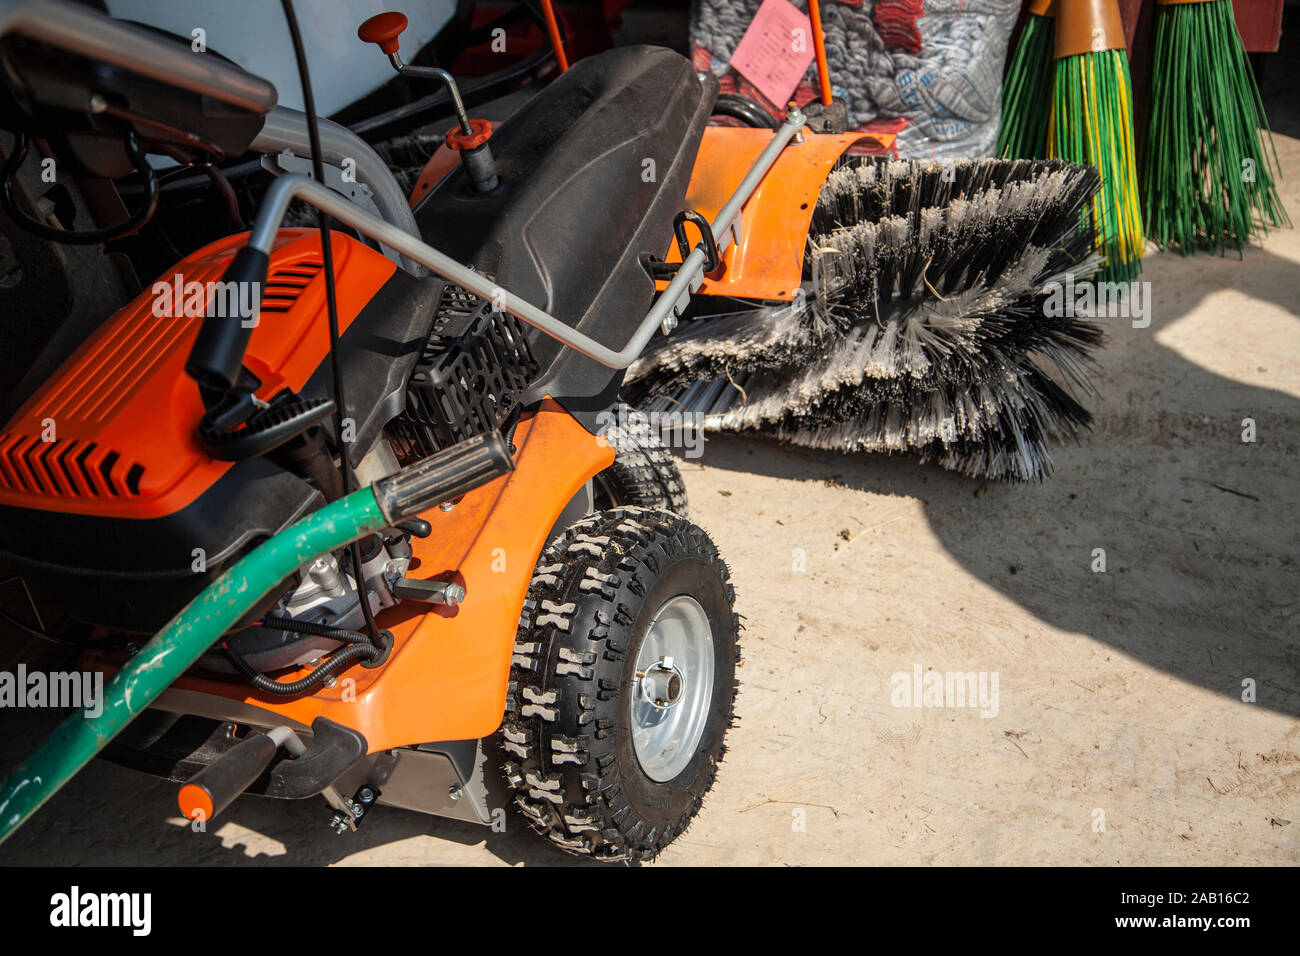 Harvesting equipment. Dust brushes mounted on a vehicle. Garage storage of motor equipment. All you need to clean the area. A man keeps tools in order Stock Photo